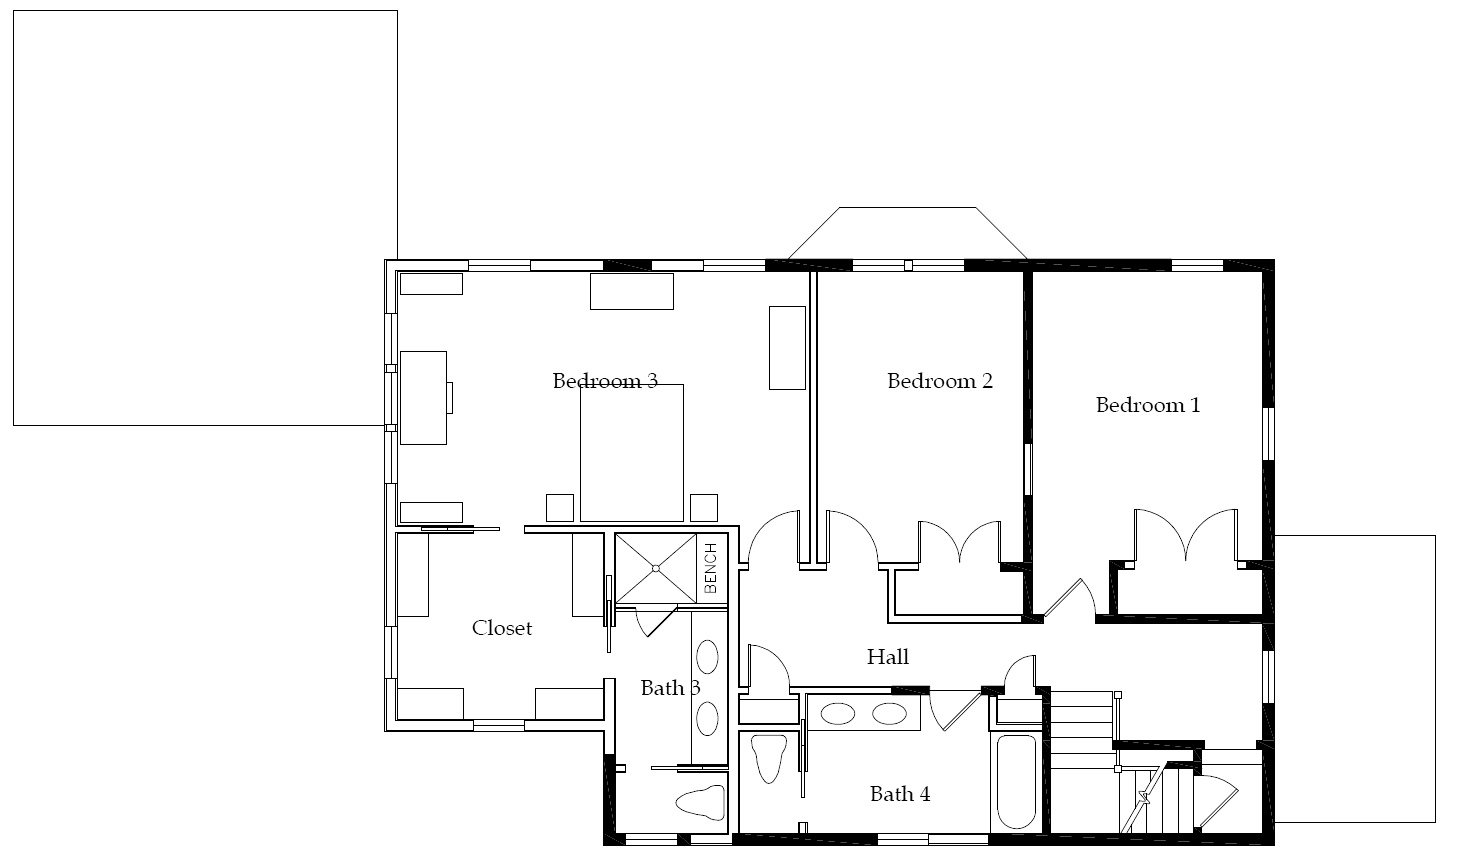 Architectural CAD drawing of second floor